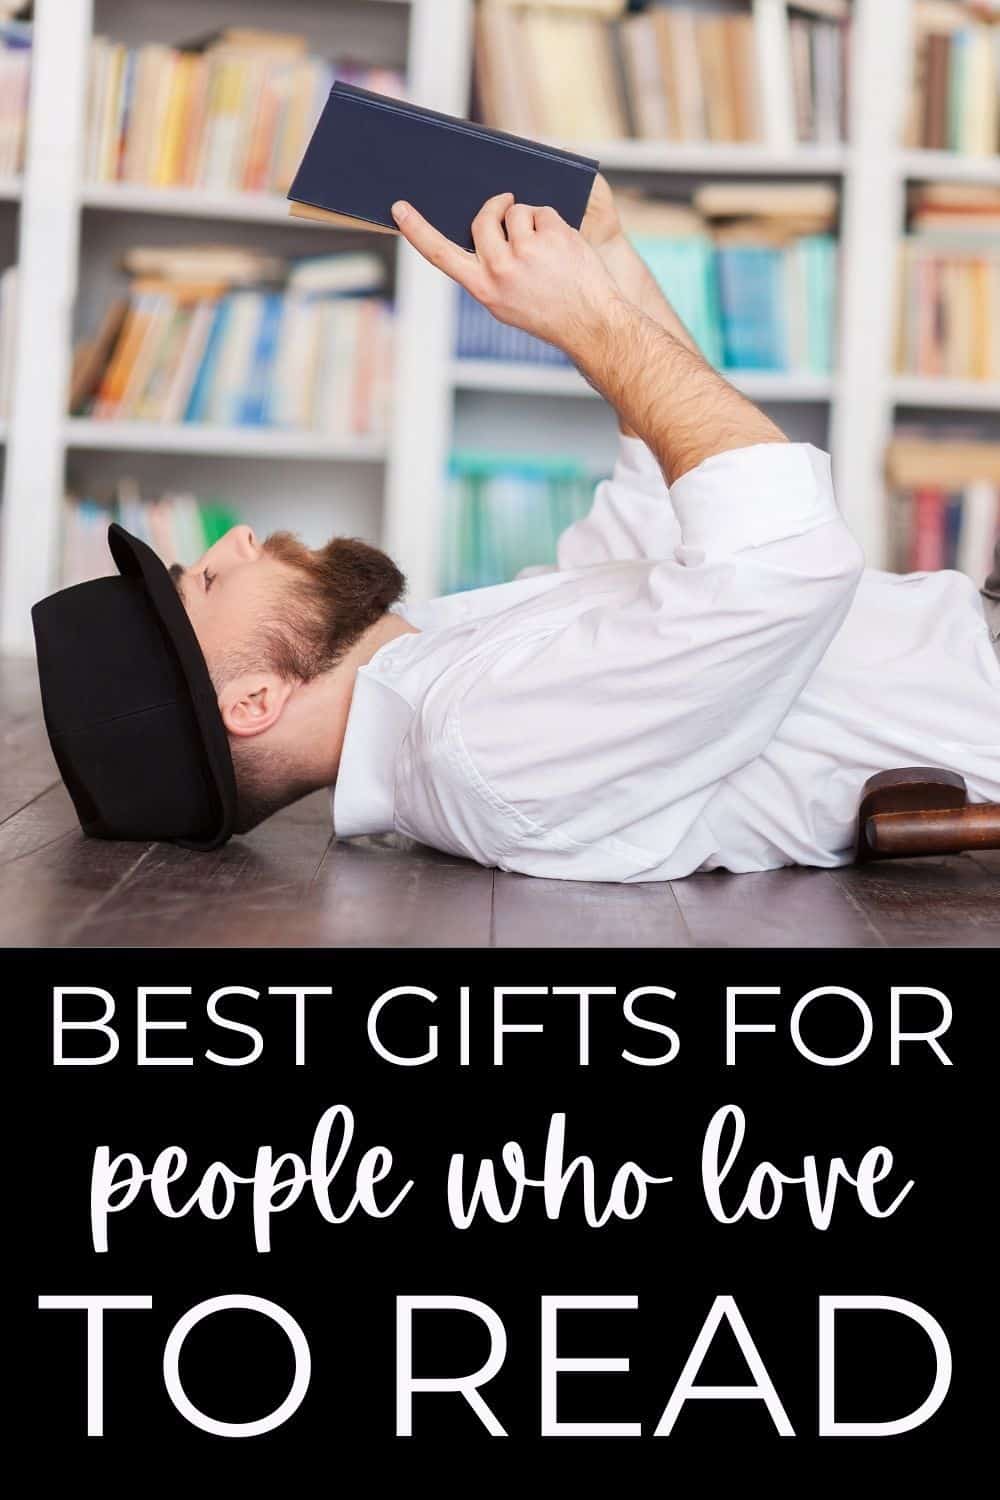 Gifts for people who love to read: a man falls off his chair reading a book